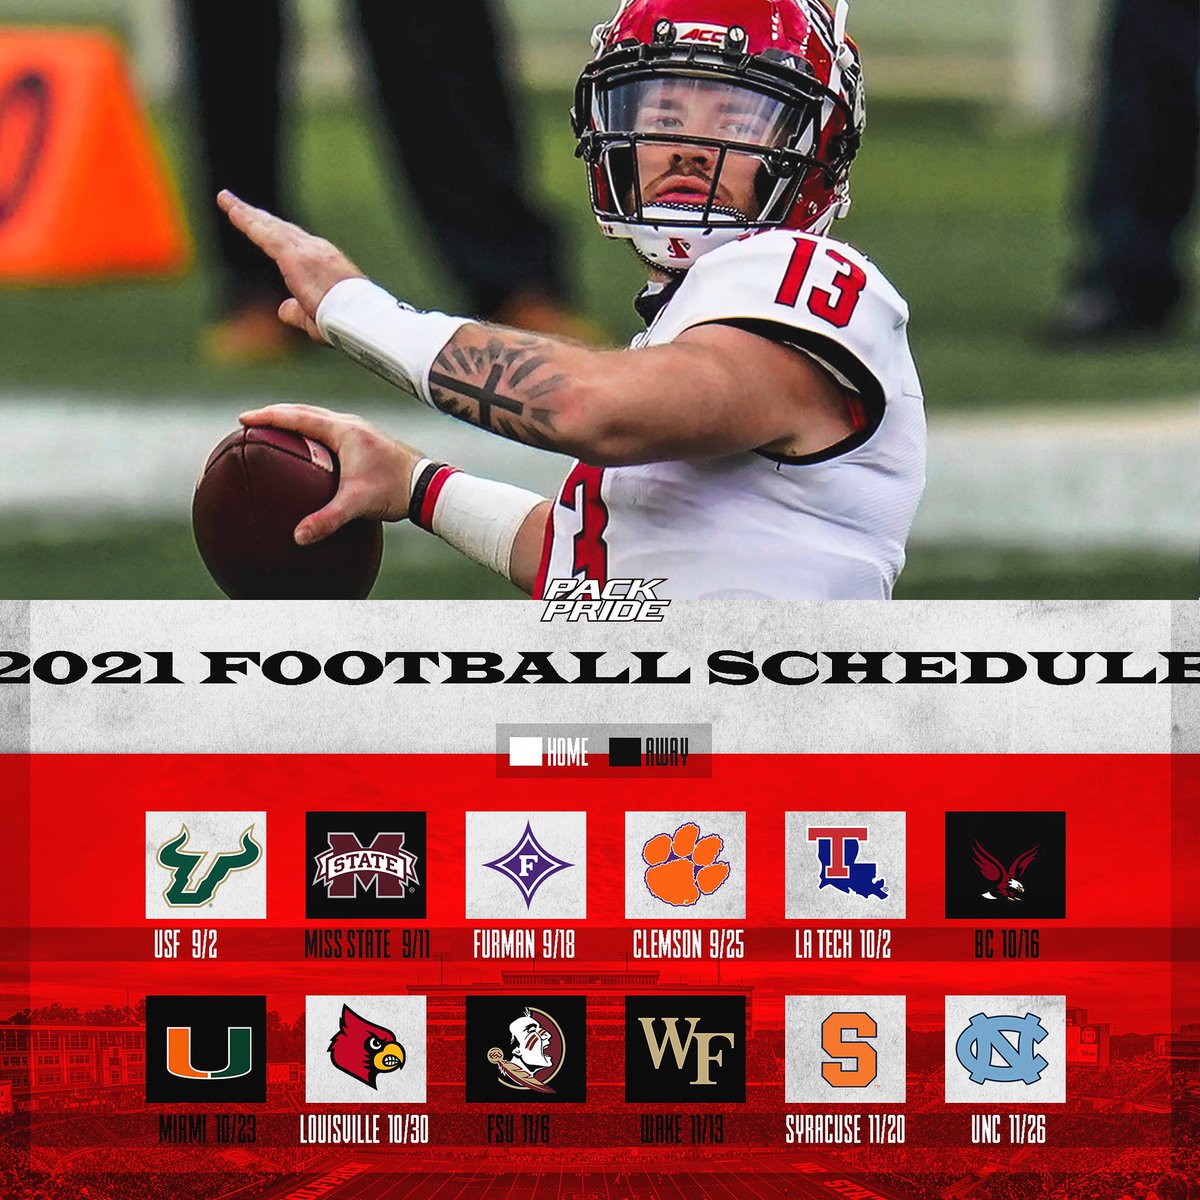 Nc State Football 2022 Schedule Pack Pride On Twitter: "🚨 The 2021 Nc State Football Schedule Is Out! 🚨  👇 Check Out The Full Breakdown Here 👇 Https://T.co/Pc2Ncbmpiz" / Twitter